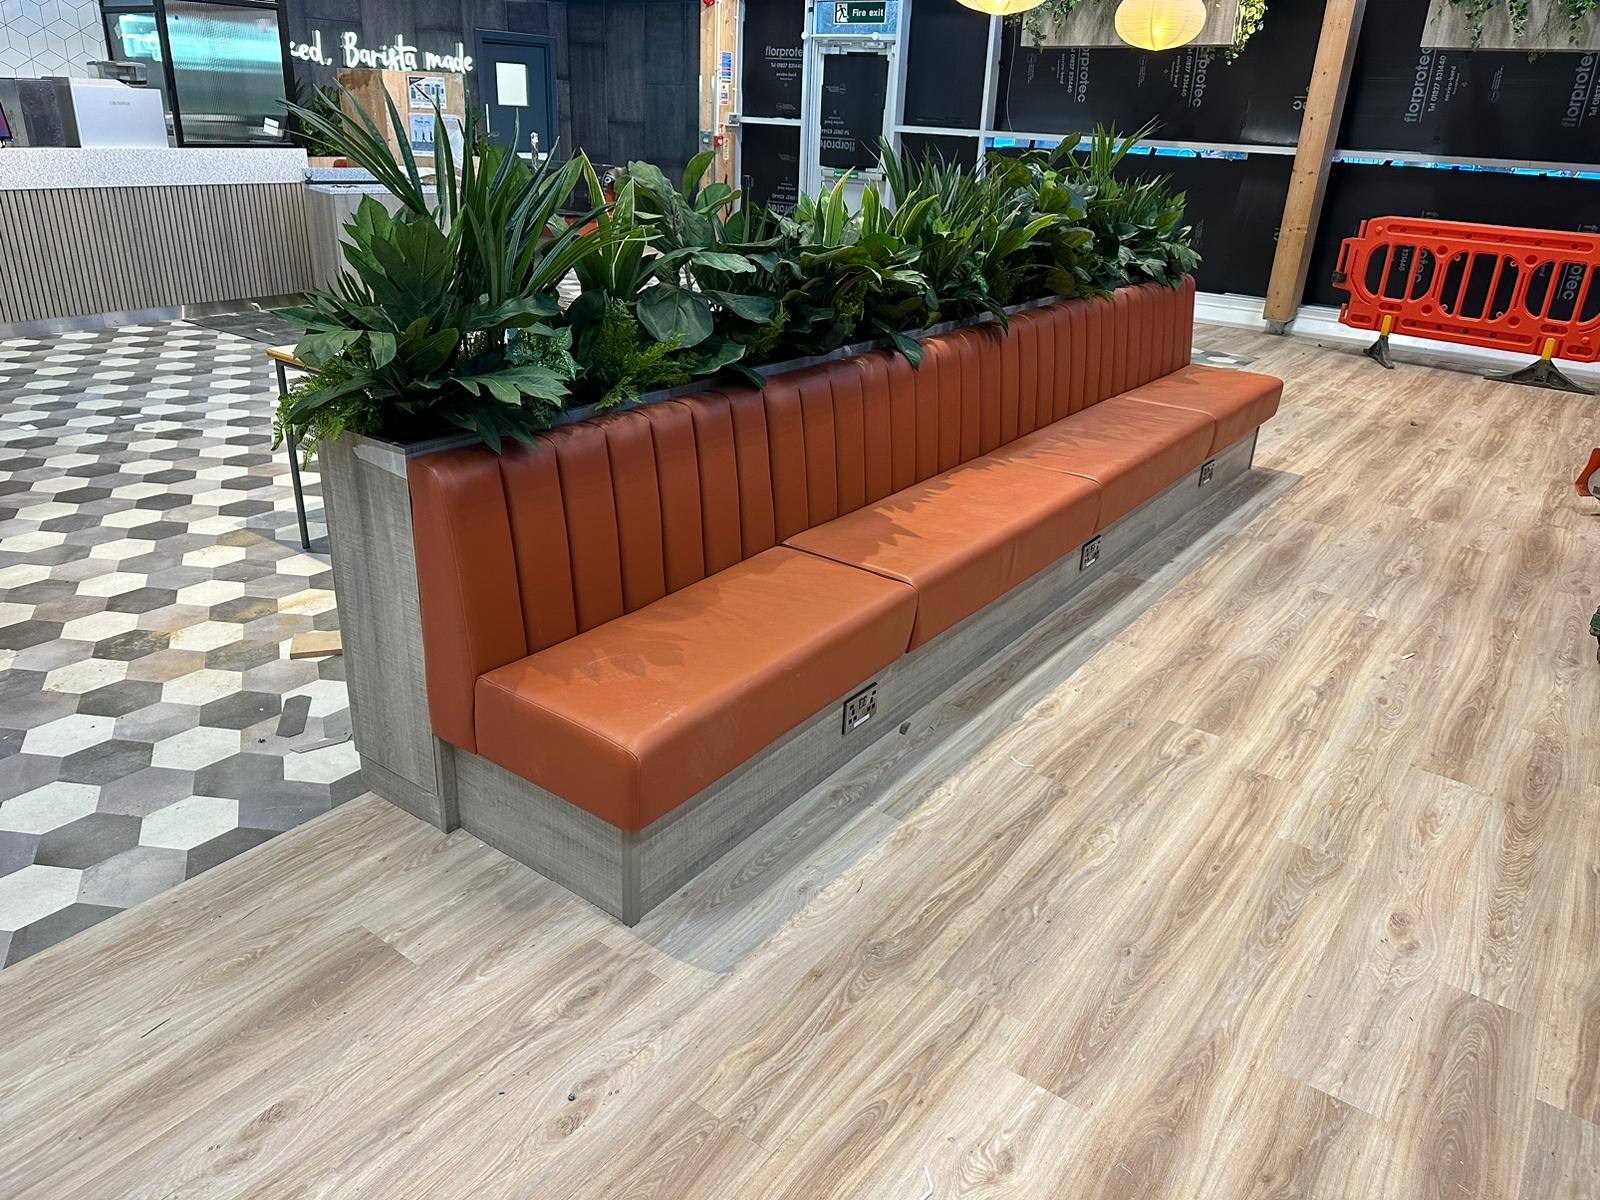 Fixed seating with faux plants